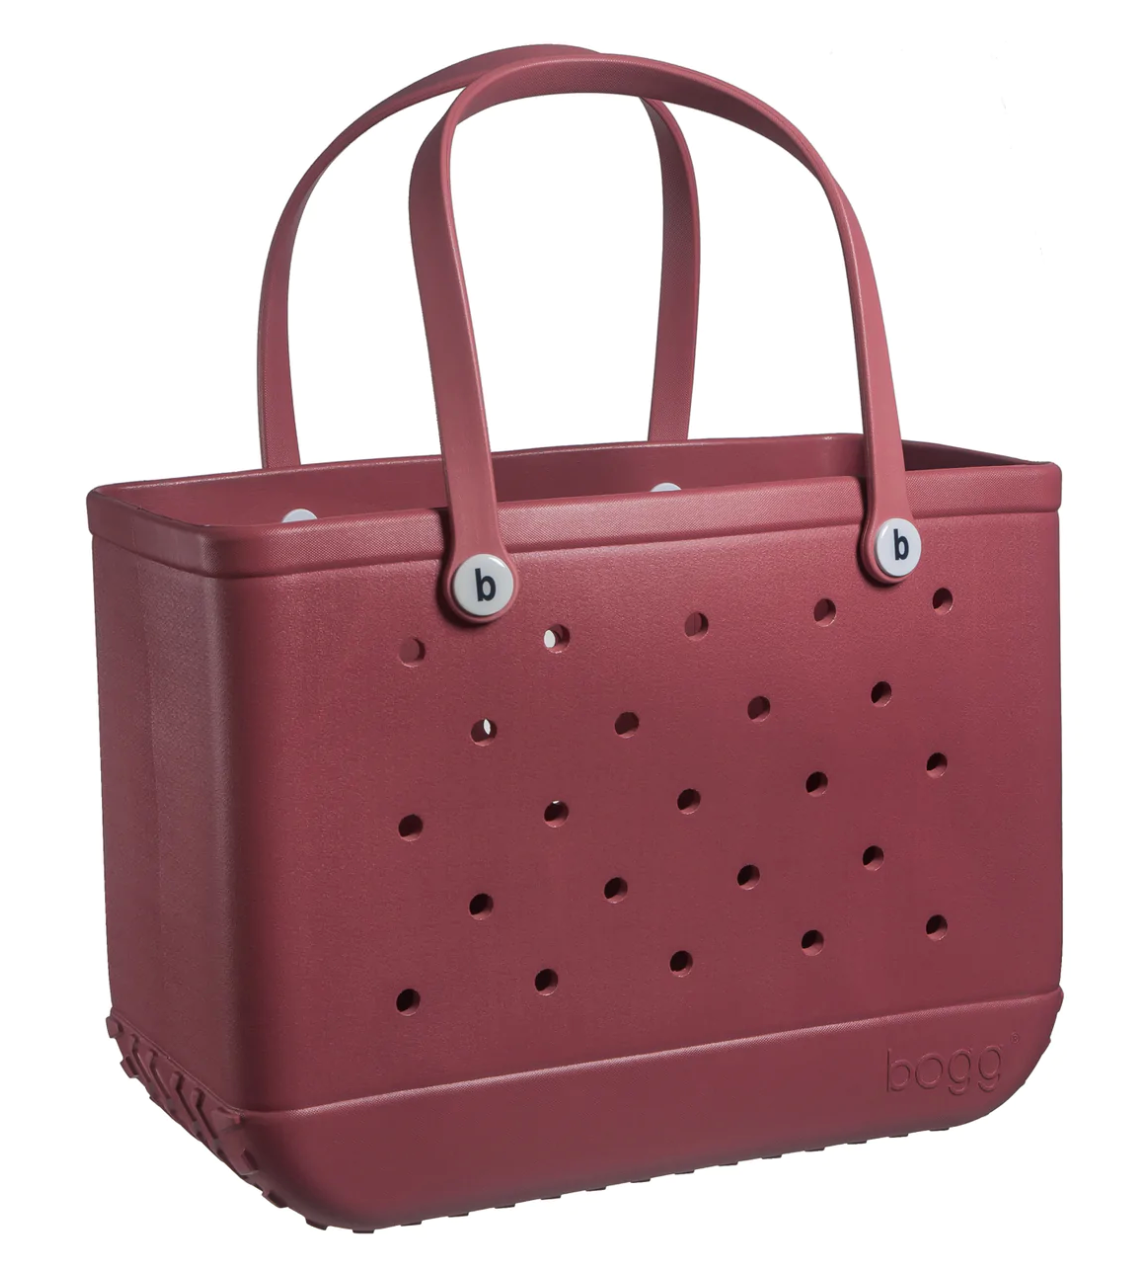 Baby Bogg Bag - Burgundy – Lovely Paperie & Gifts